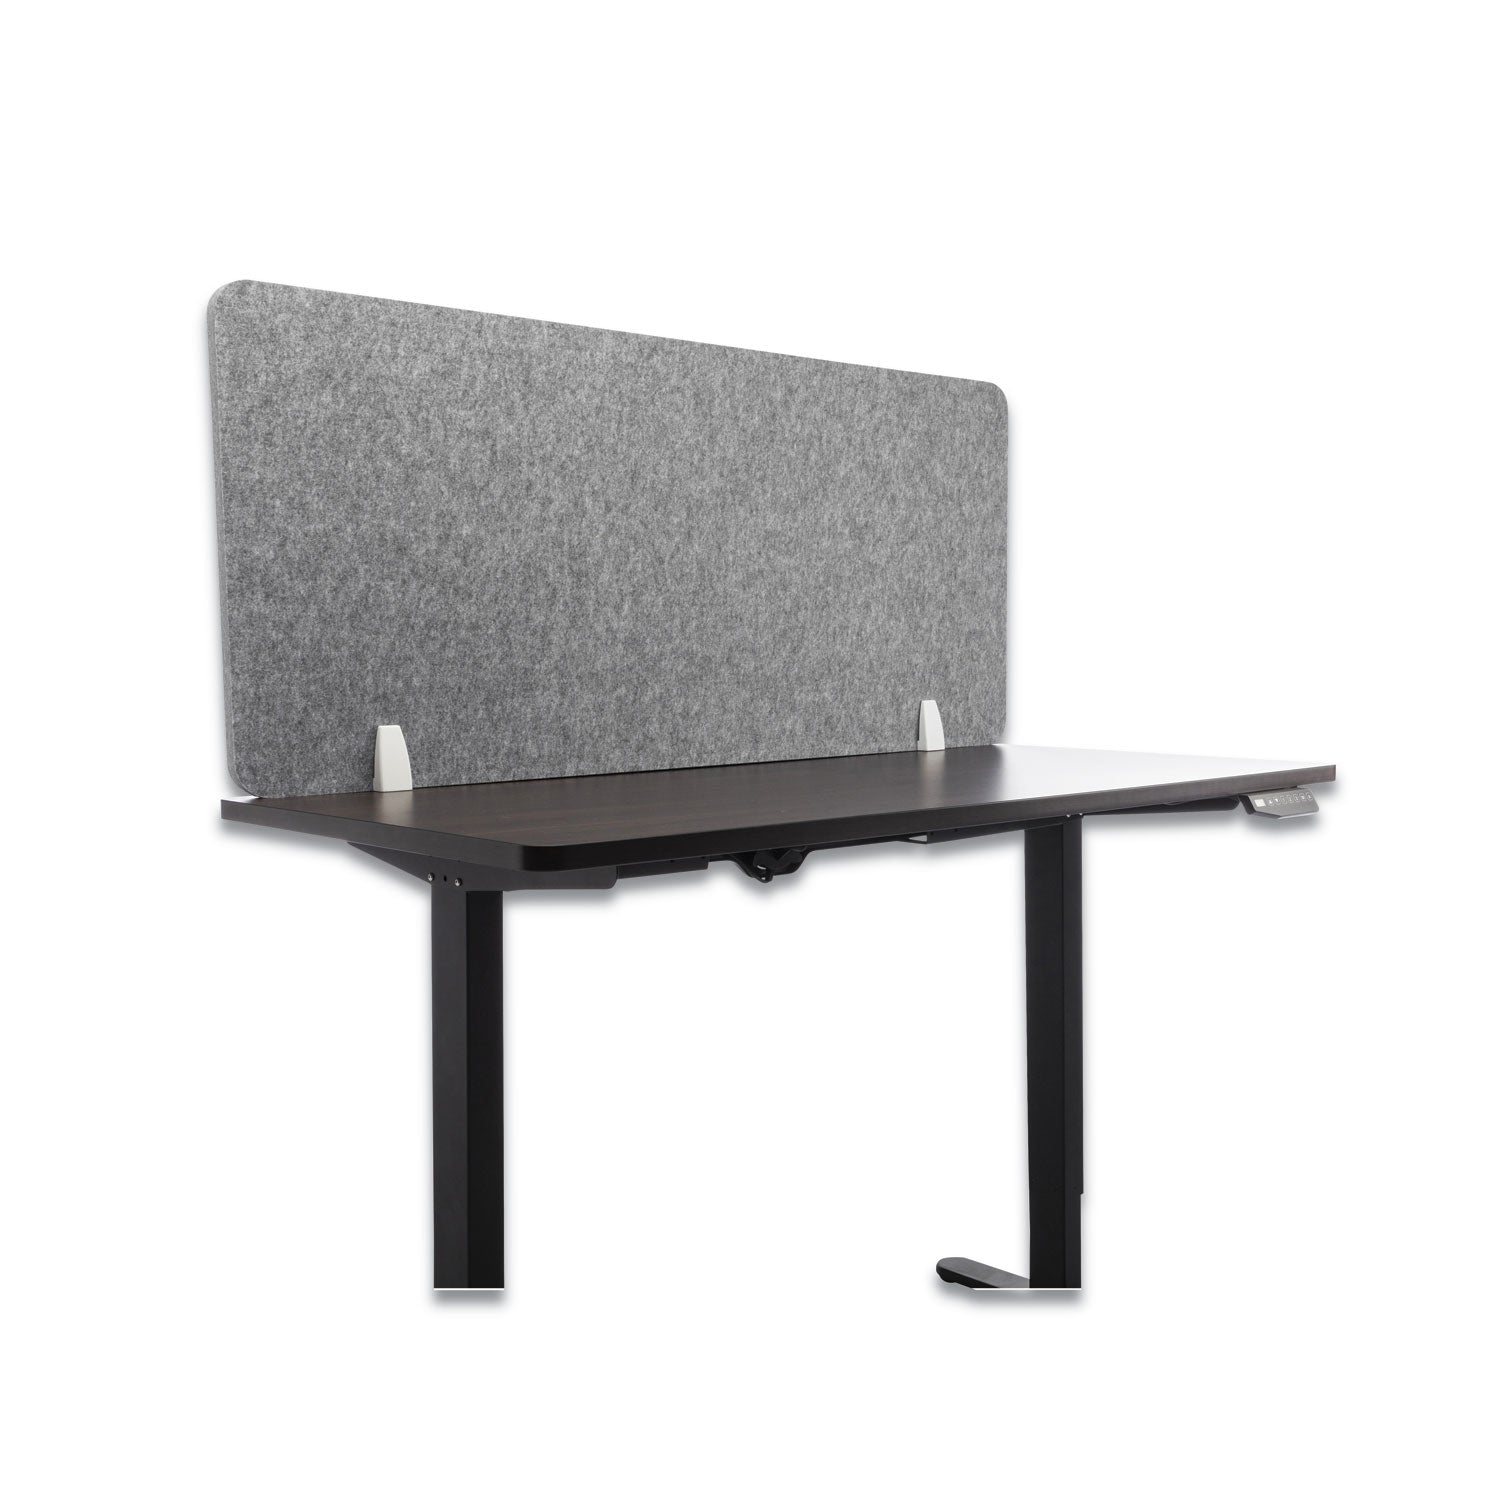 desk-screen-cubicle-panel-and-office-partition-privacy-screen-545-x-1-x-235-polyester-gray_gn1luds55241g - 1